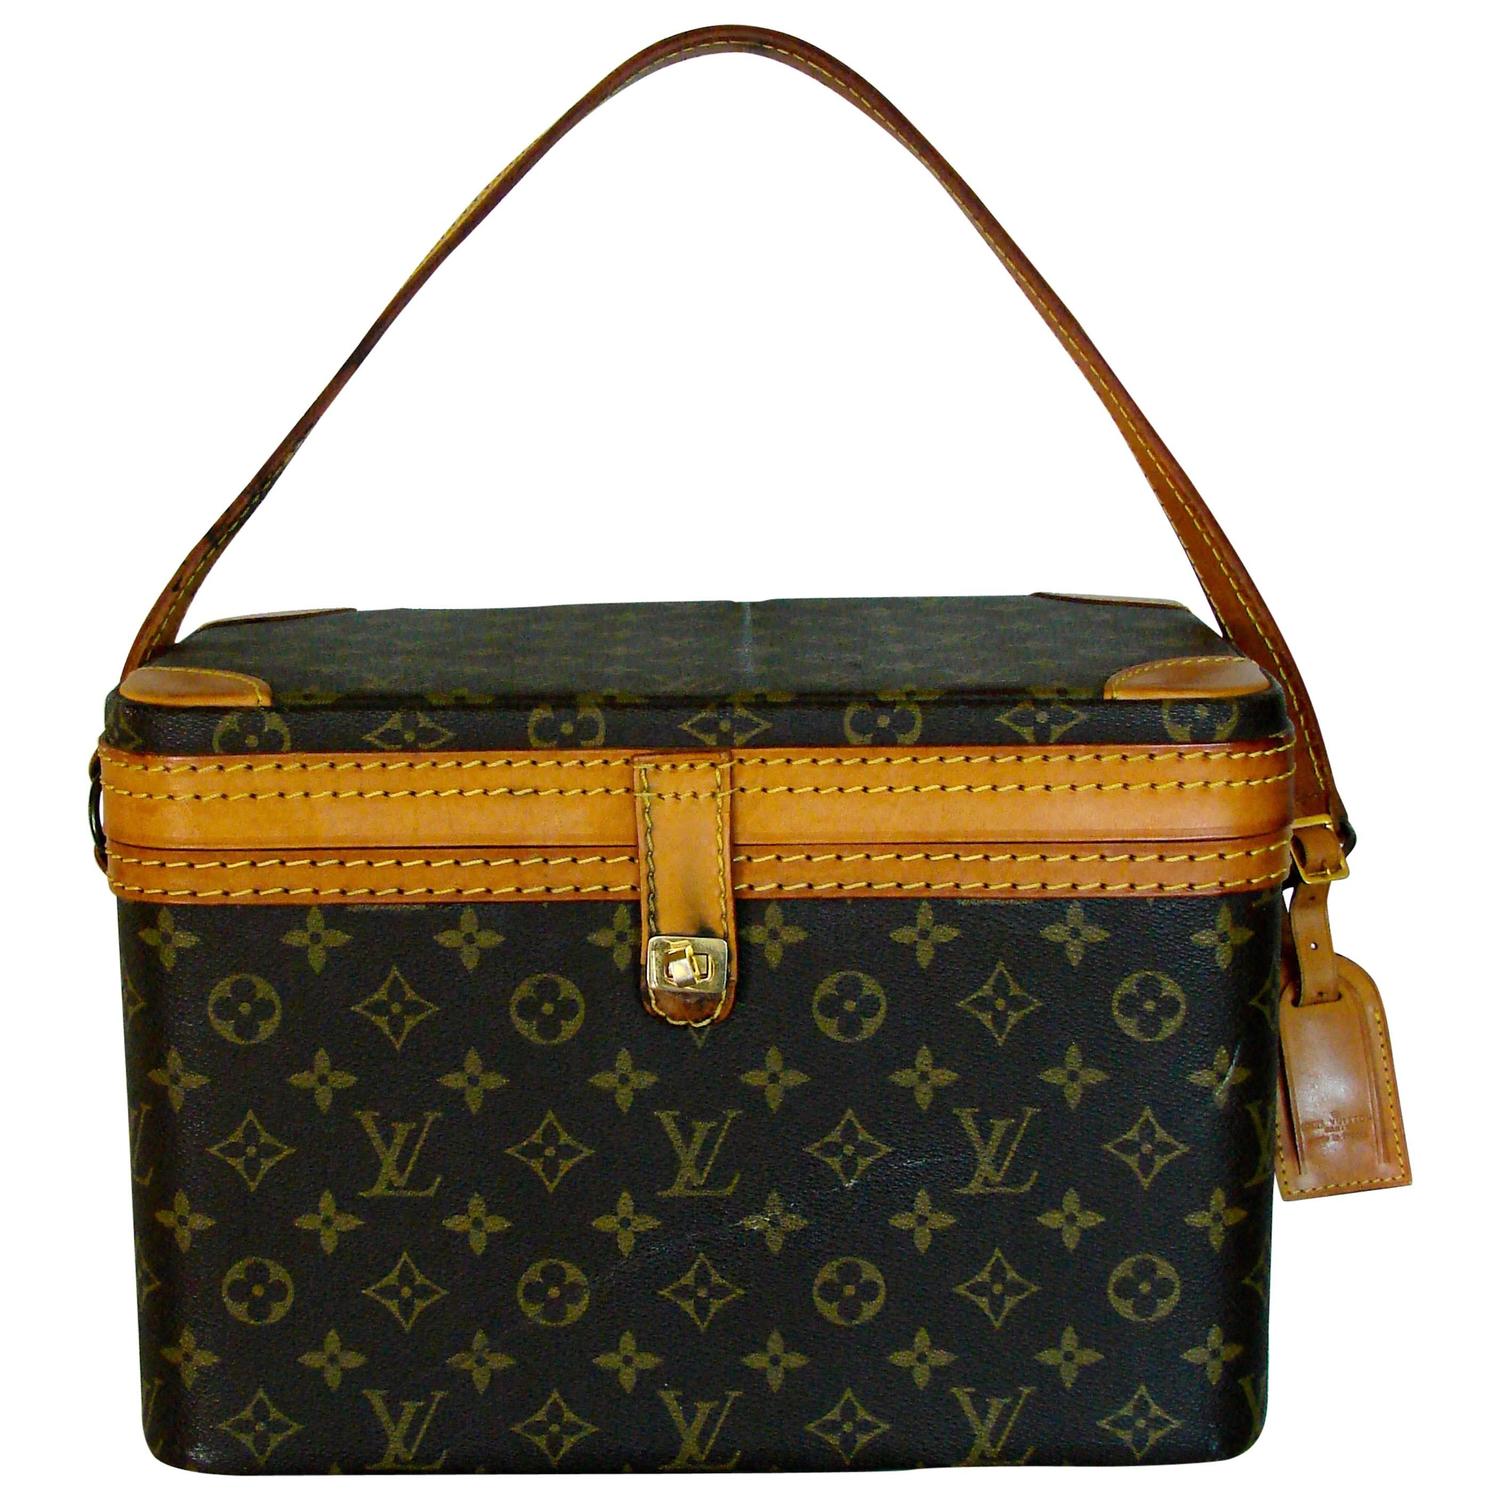 Unusual Louis Vuitton Monogram Train Case or Carry On Bag + Luggage Tag 1980s at 1stdibs